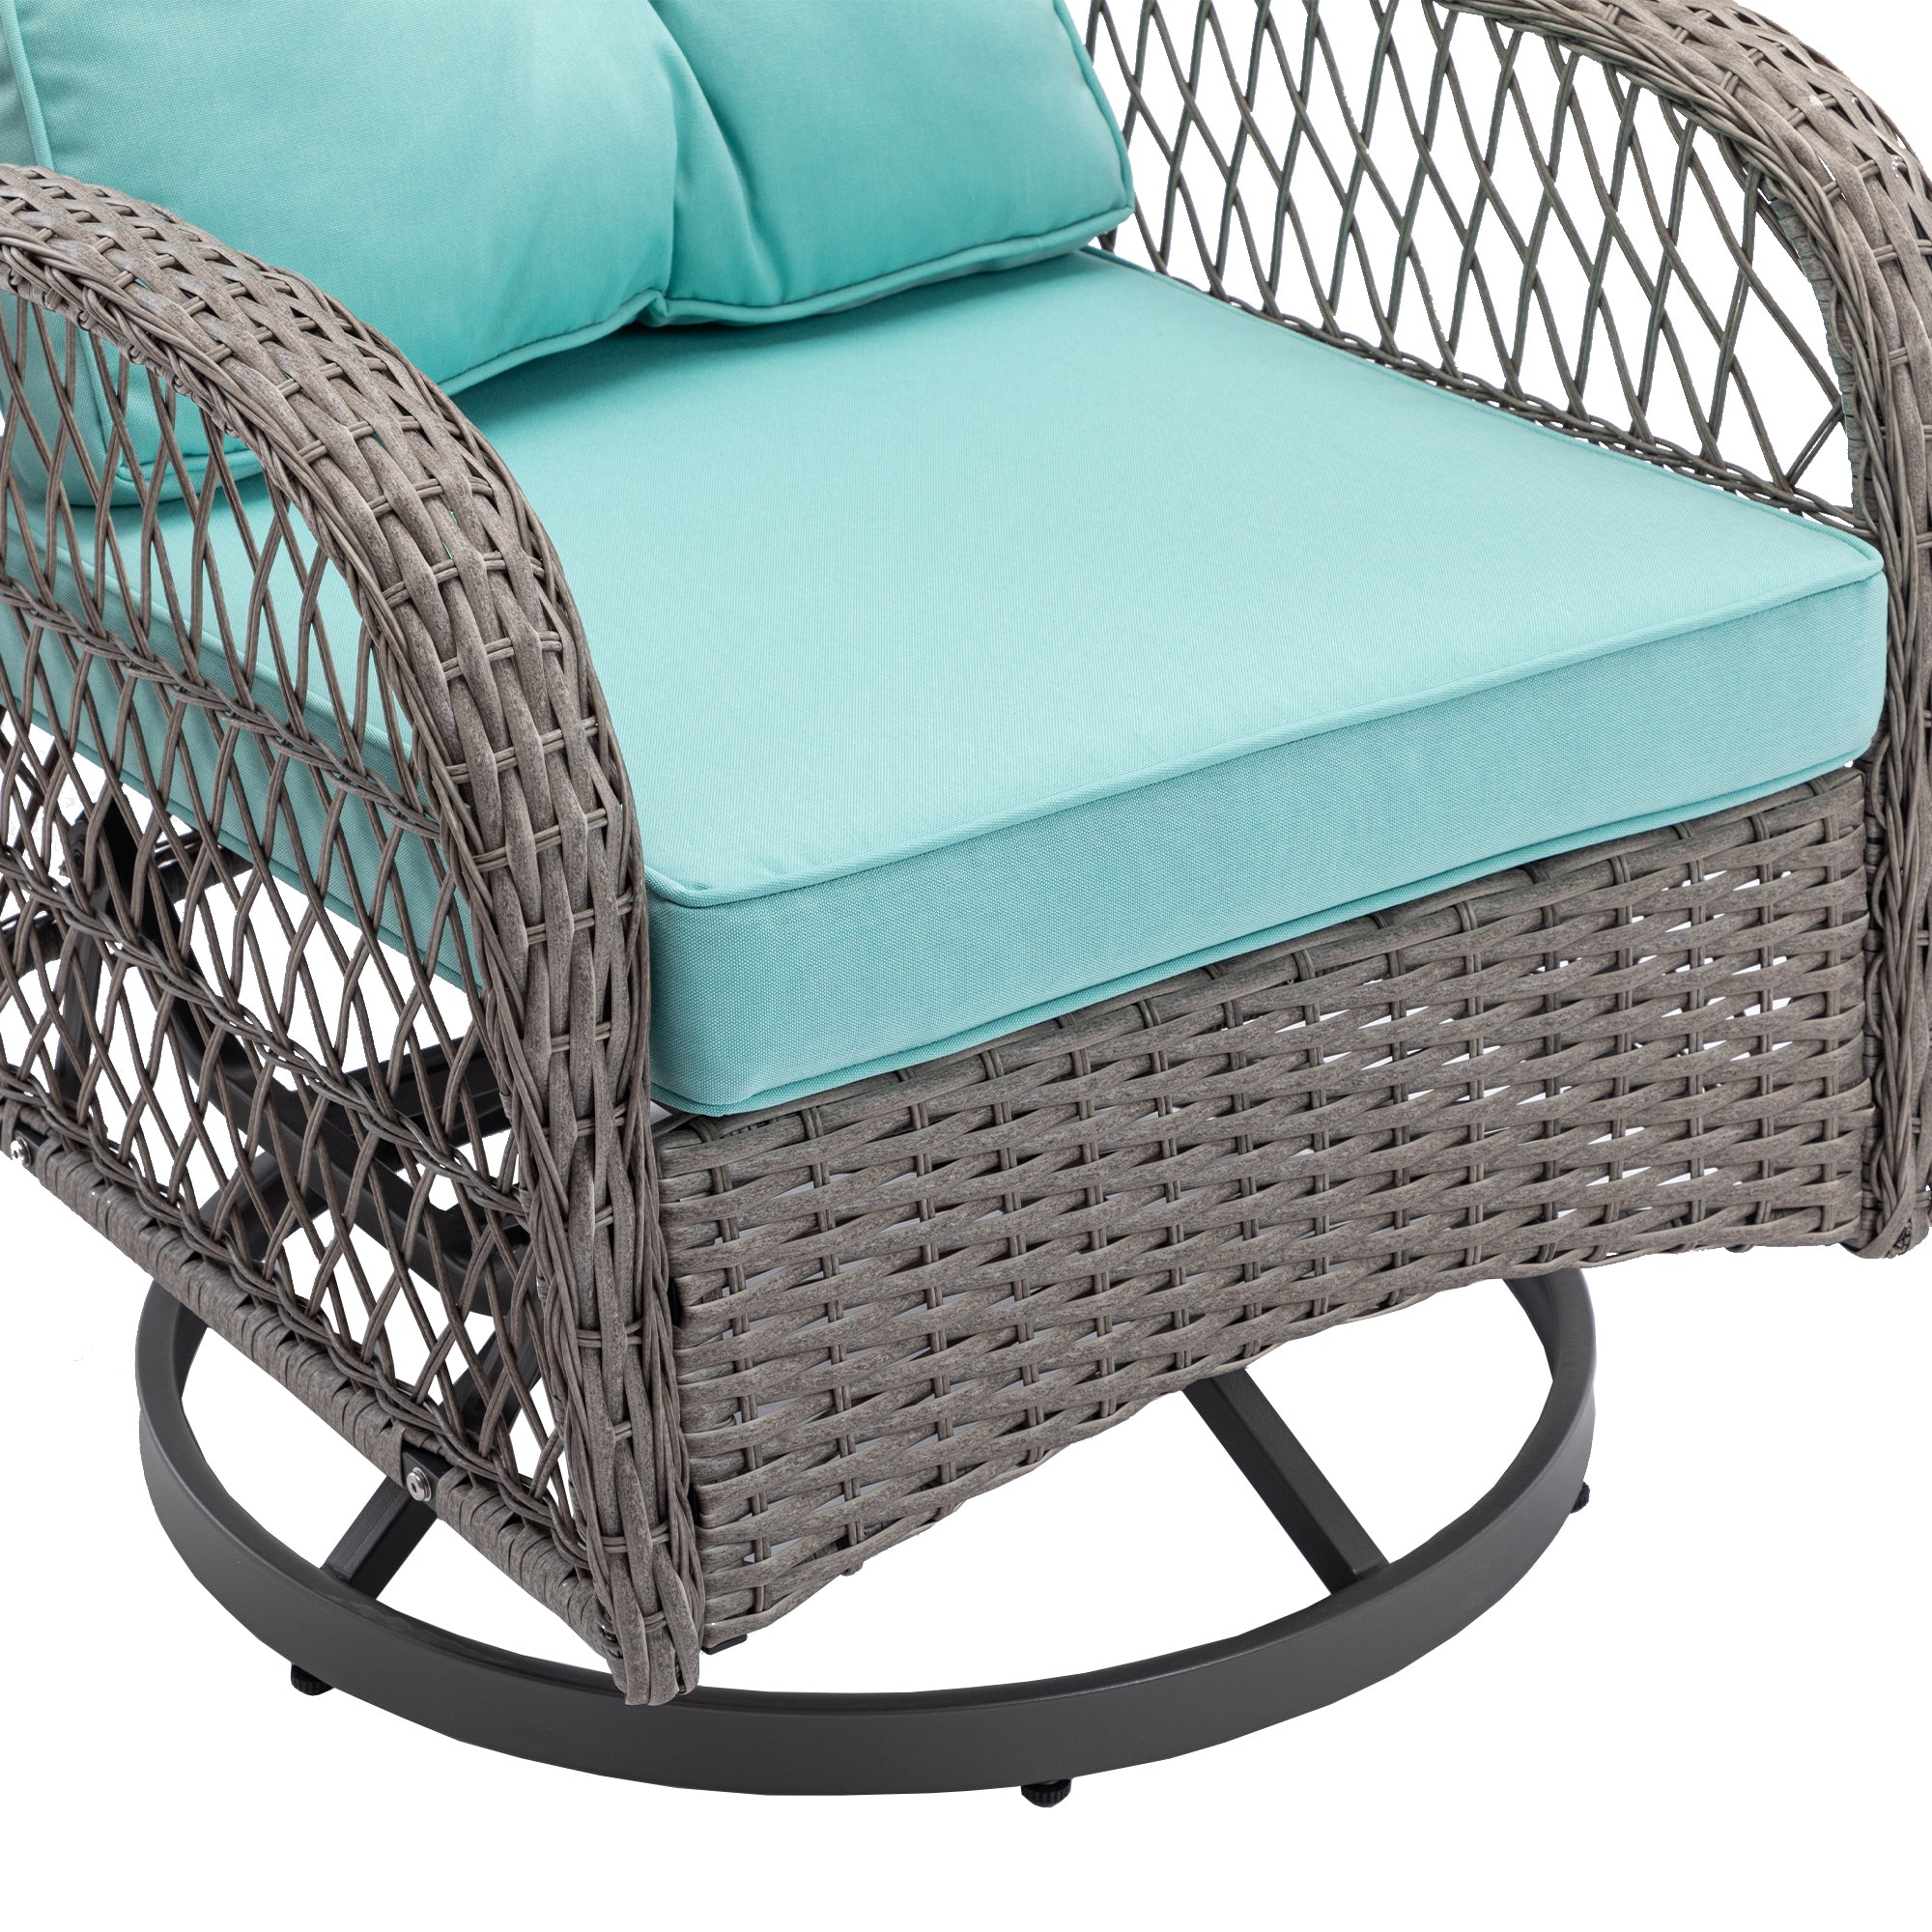 3 Pcs Outdoor Wicker Swivel Chair Set With Coffee Table and Cushions